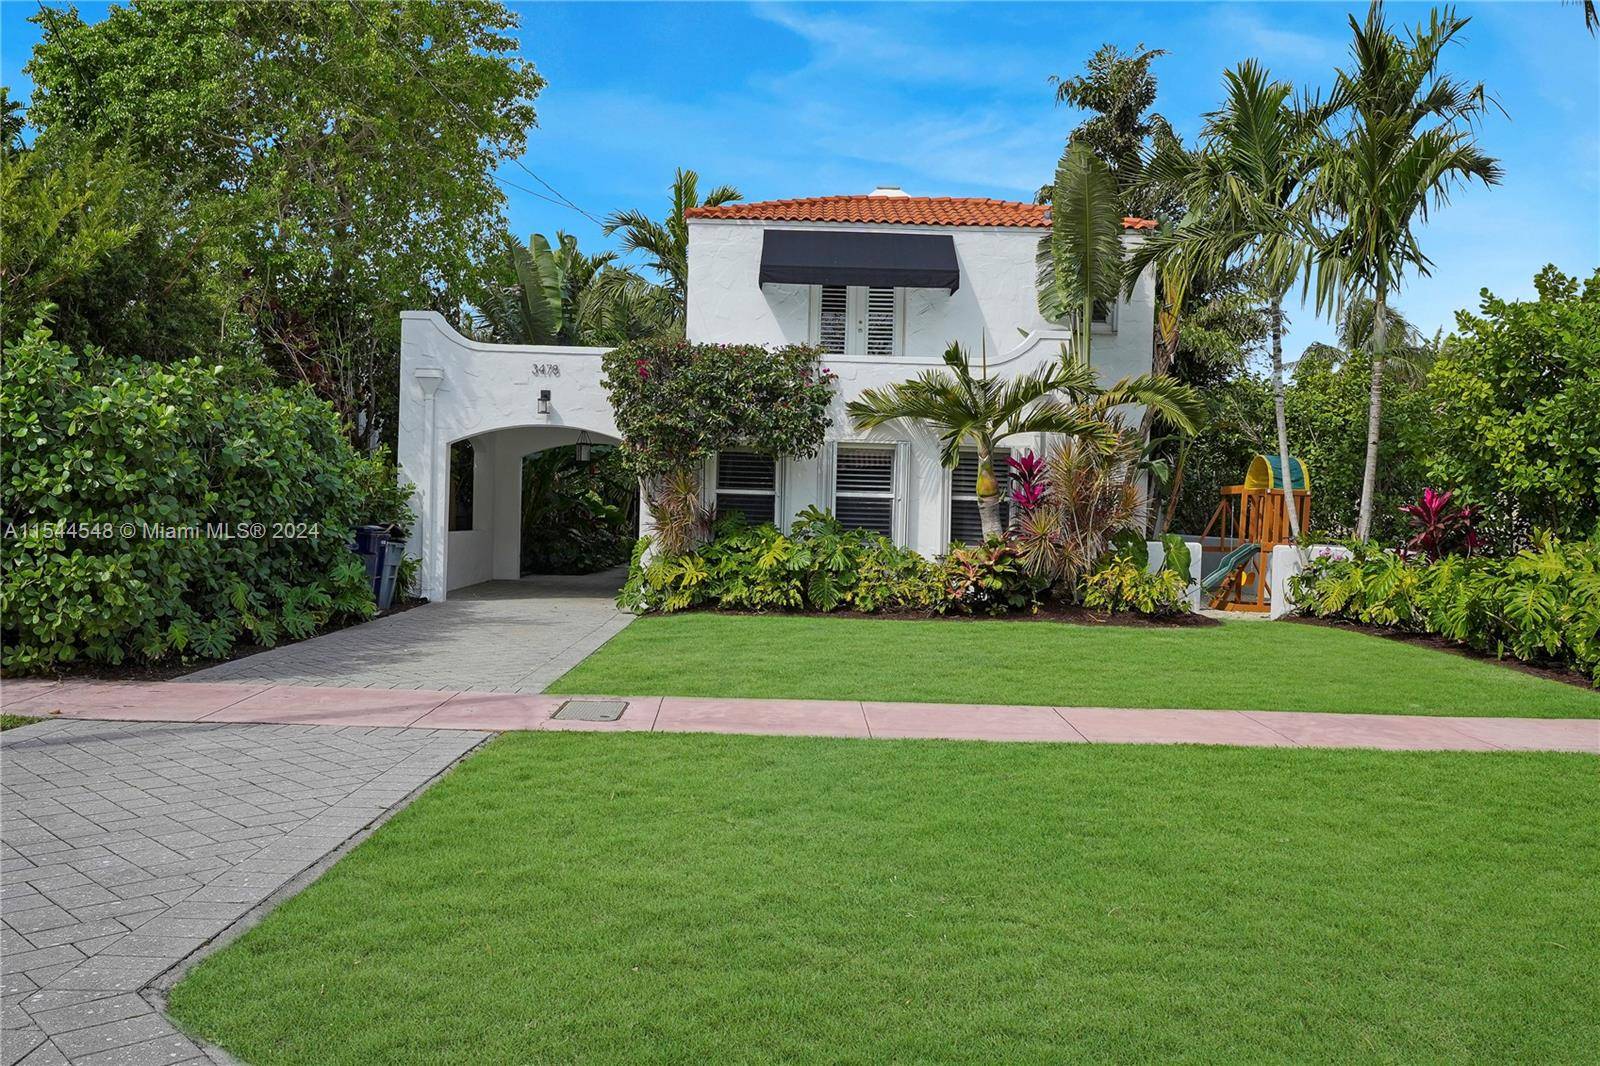 Nestled in Miami Beach's coveted neighborhood, this renovated 1930s two story home blends timeless charm with modern elegance.